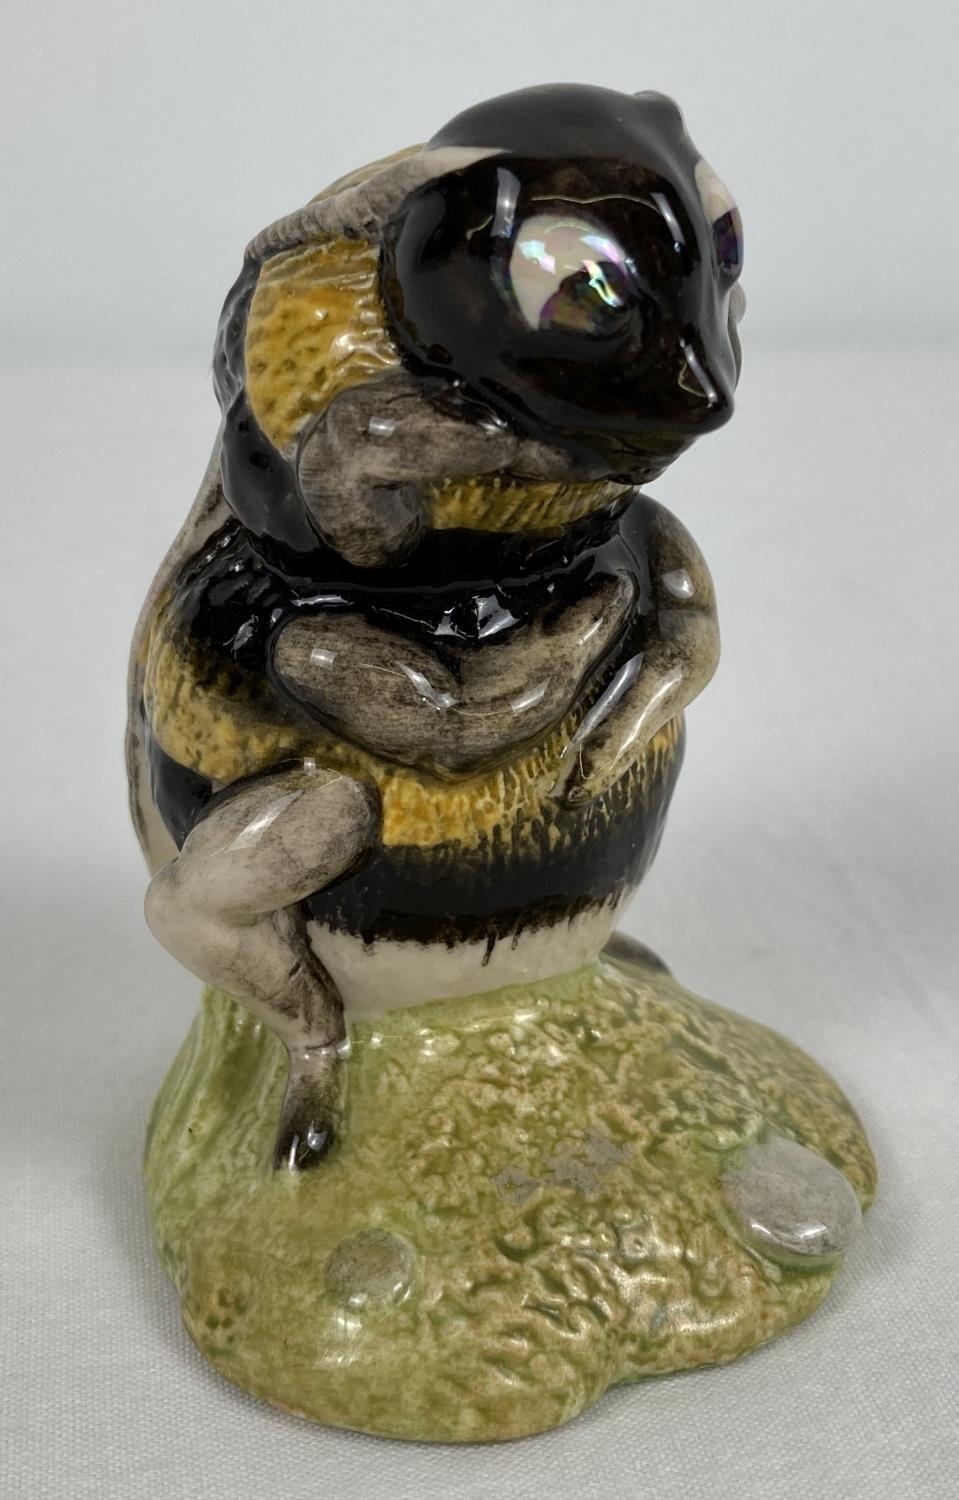 Royal Albert ceramic Beatrix Potter figurine "Babbitty Bumble". With brown F.Warne & Co 1989